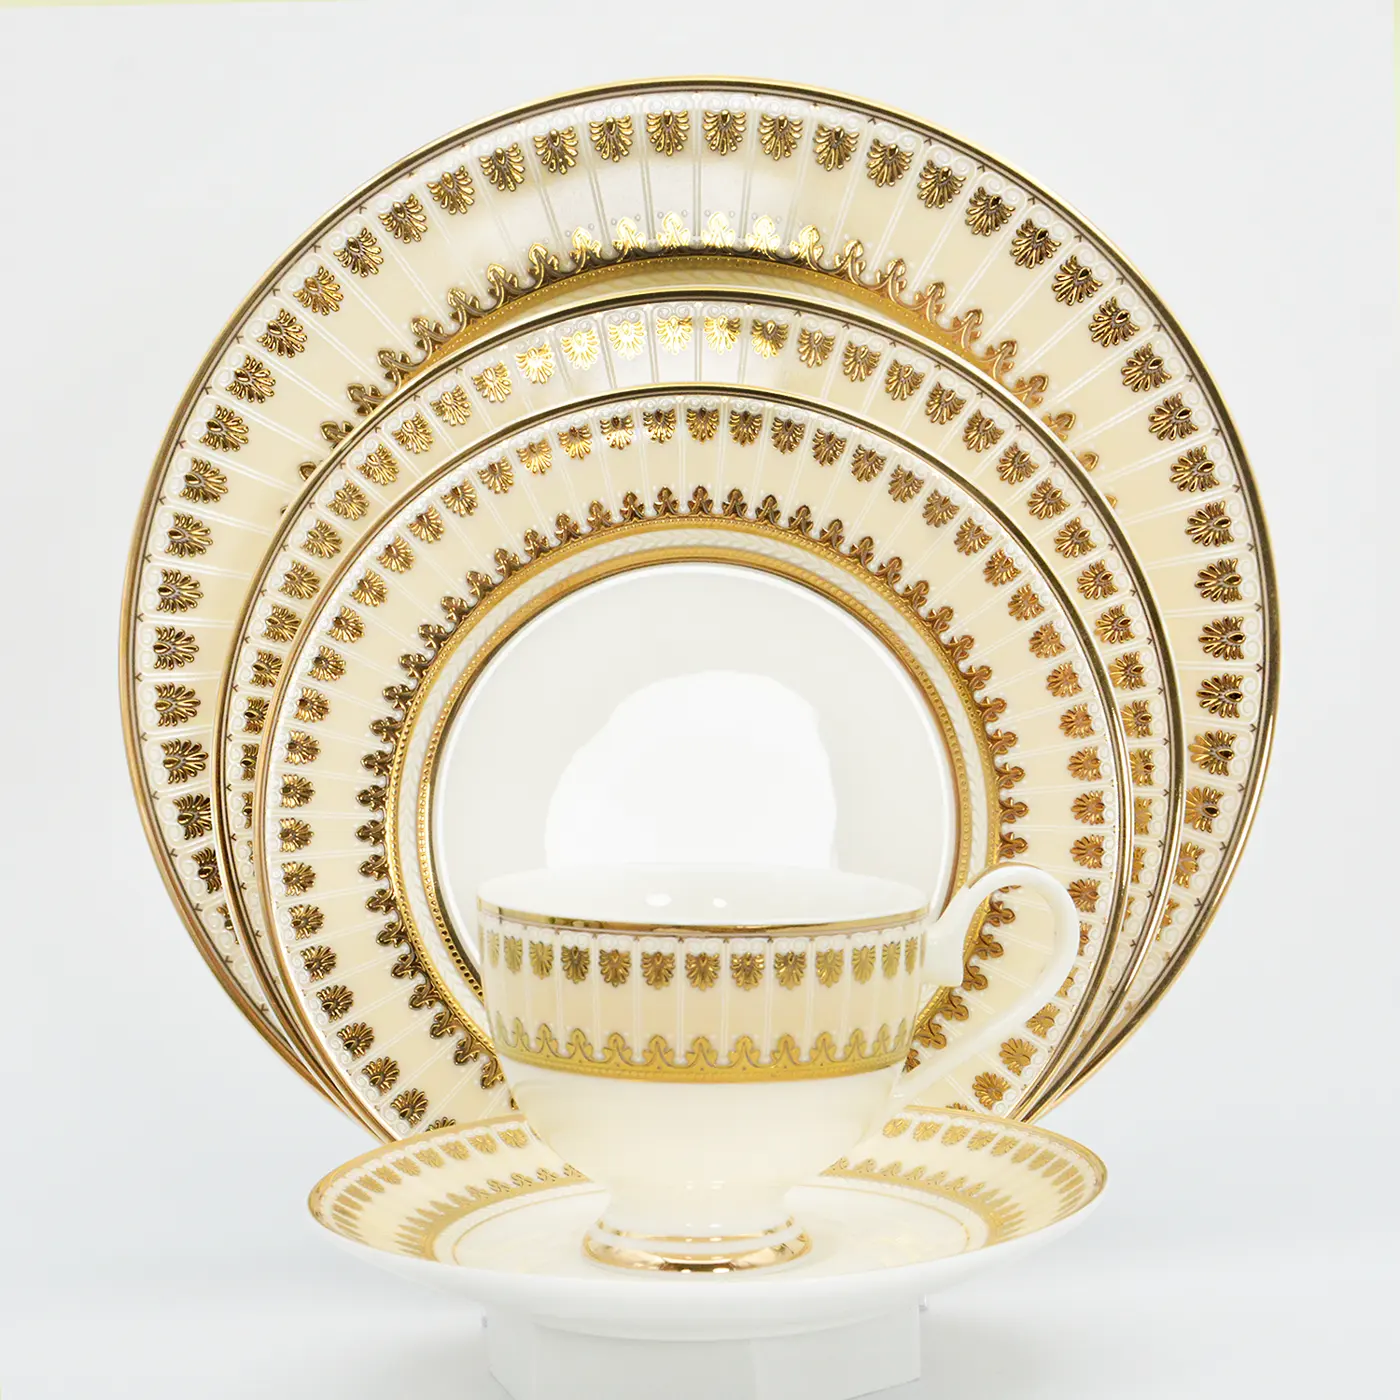 High quality gold decorations yellow color charger plates customization plates sets dinnerware